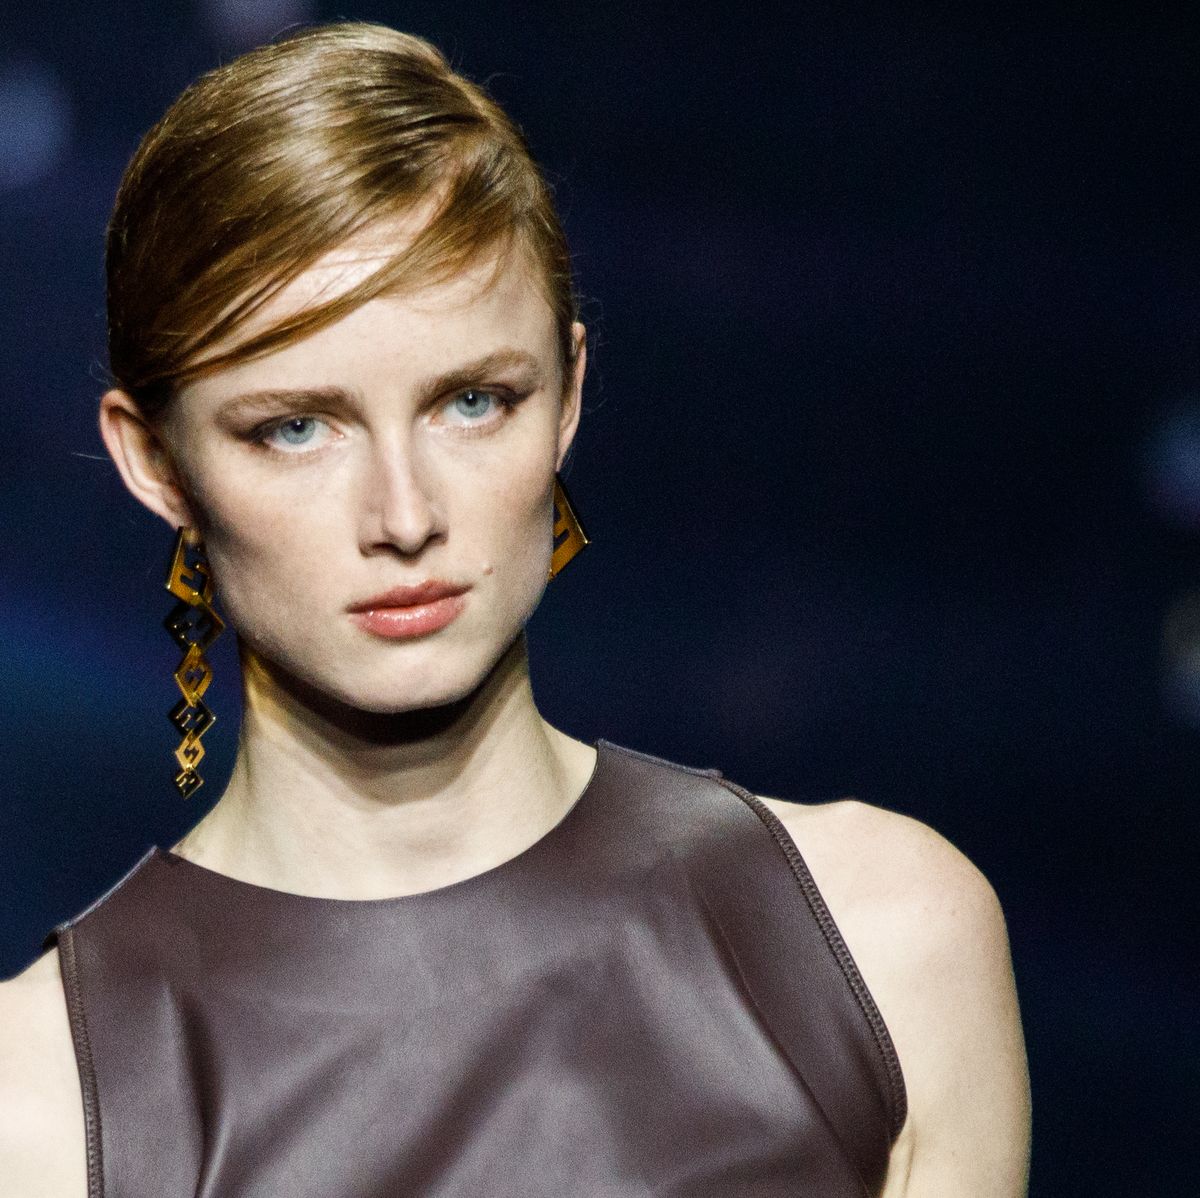 Beauty Trends From the Autumn/Winter 2023 Runways